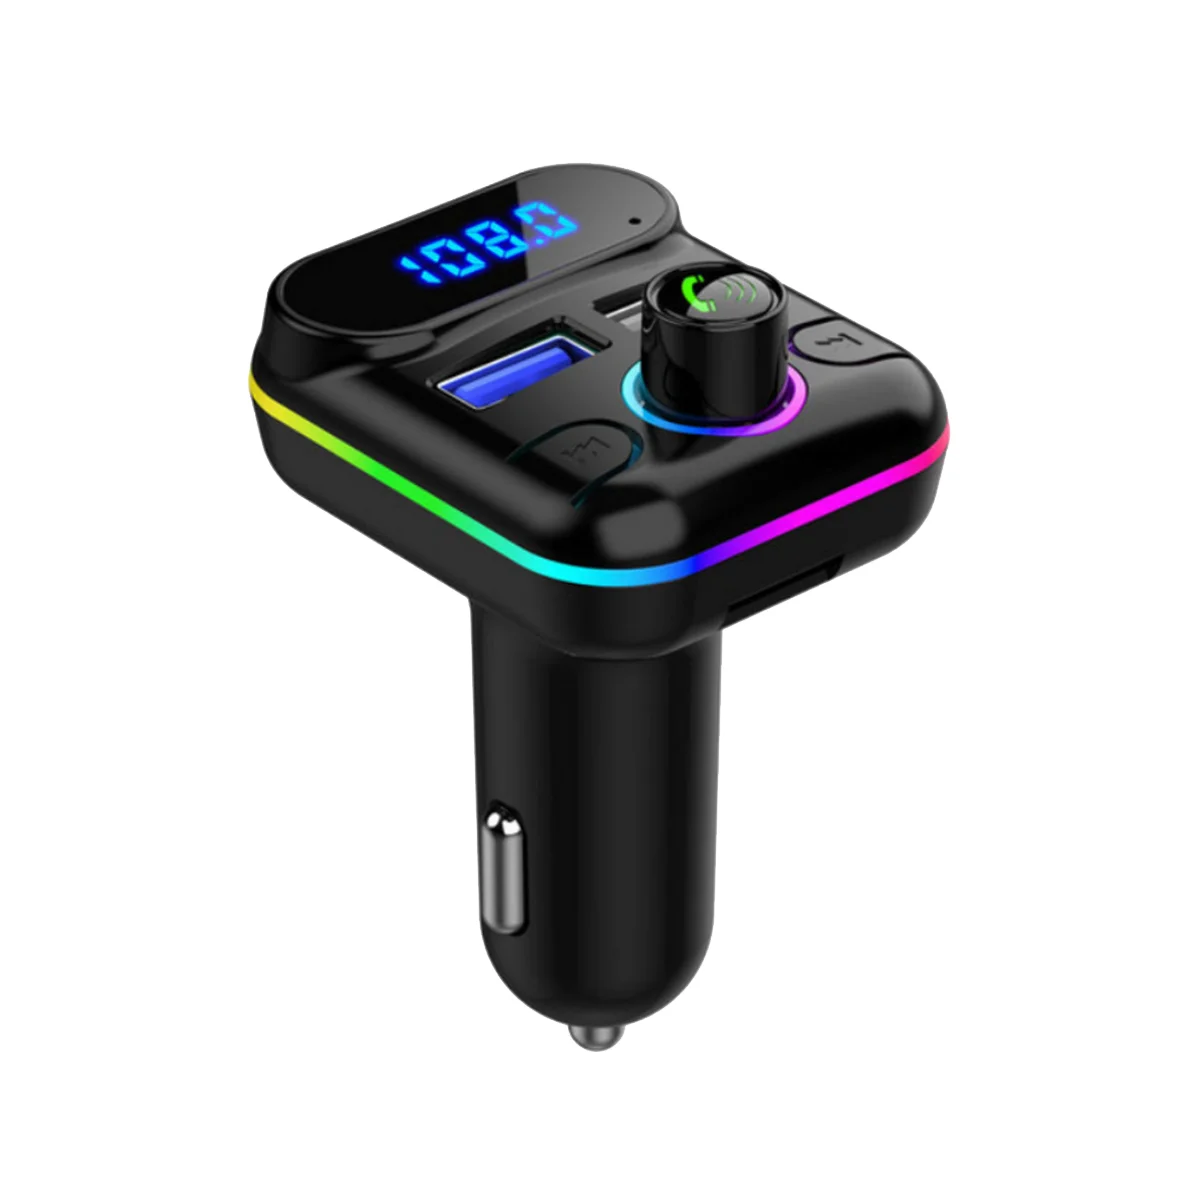 

Car Hands-Free M33 Bluetooth-Compaitable 5.0 FM Transmitter Dual USB Charger Kit MP3 Player Disk Player